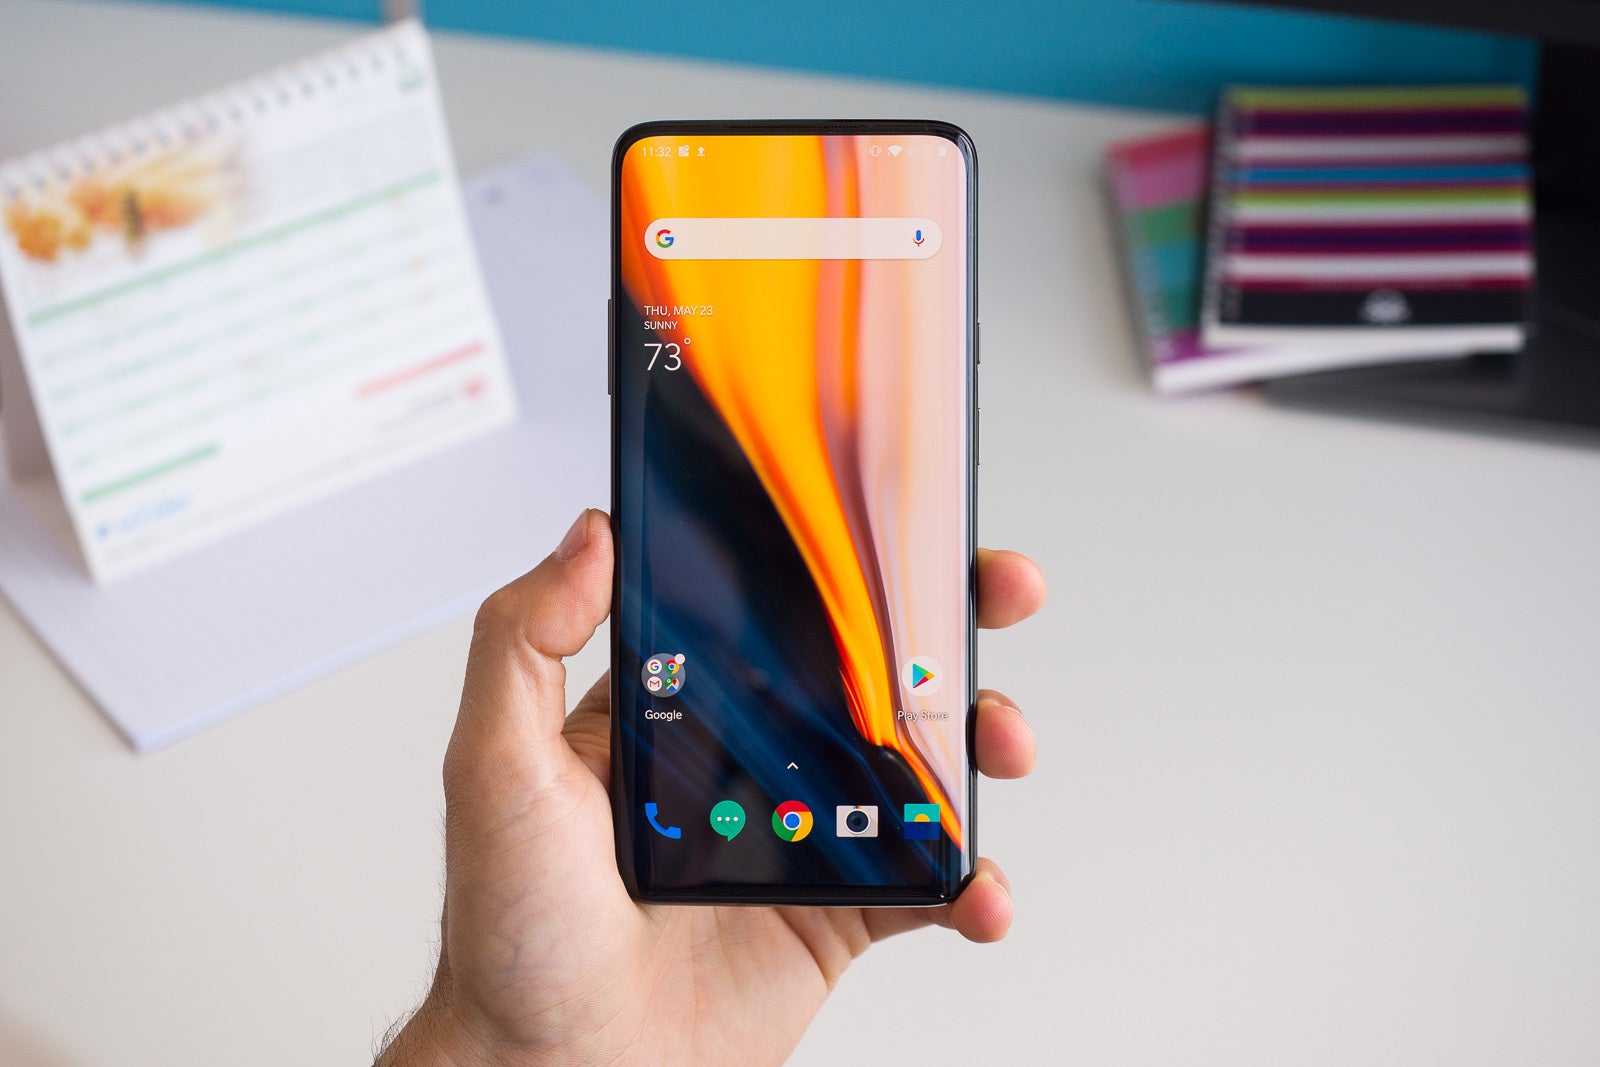 The OnePlus 7 Pro - Here's what the OnePlus 7T &amp; 7T Pro might look like from the rear